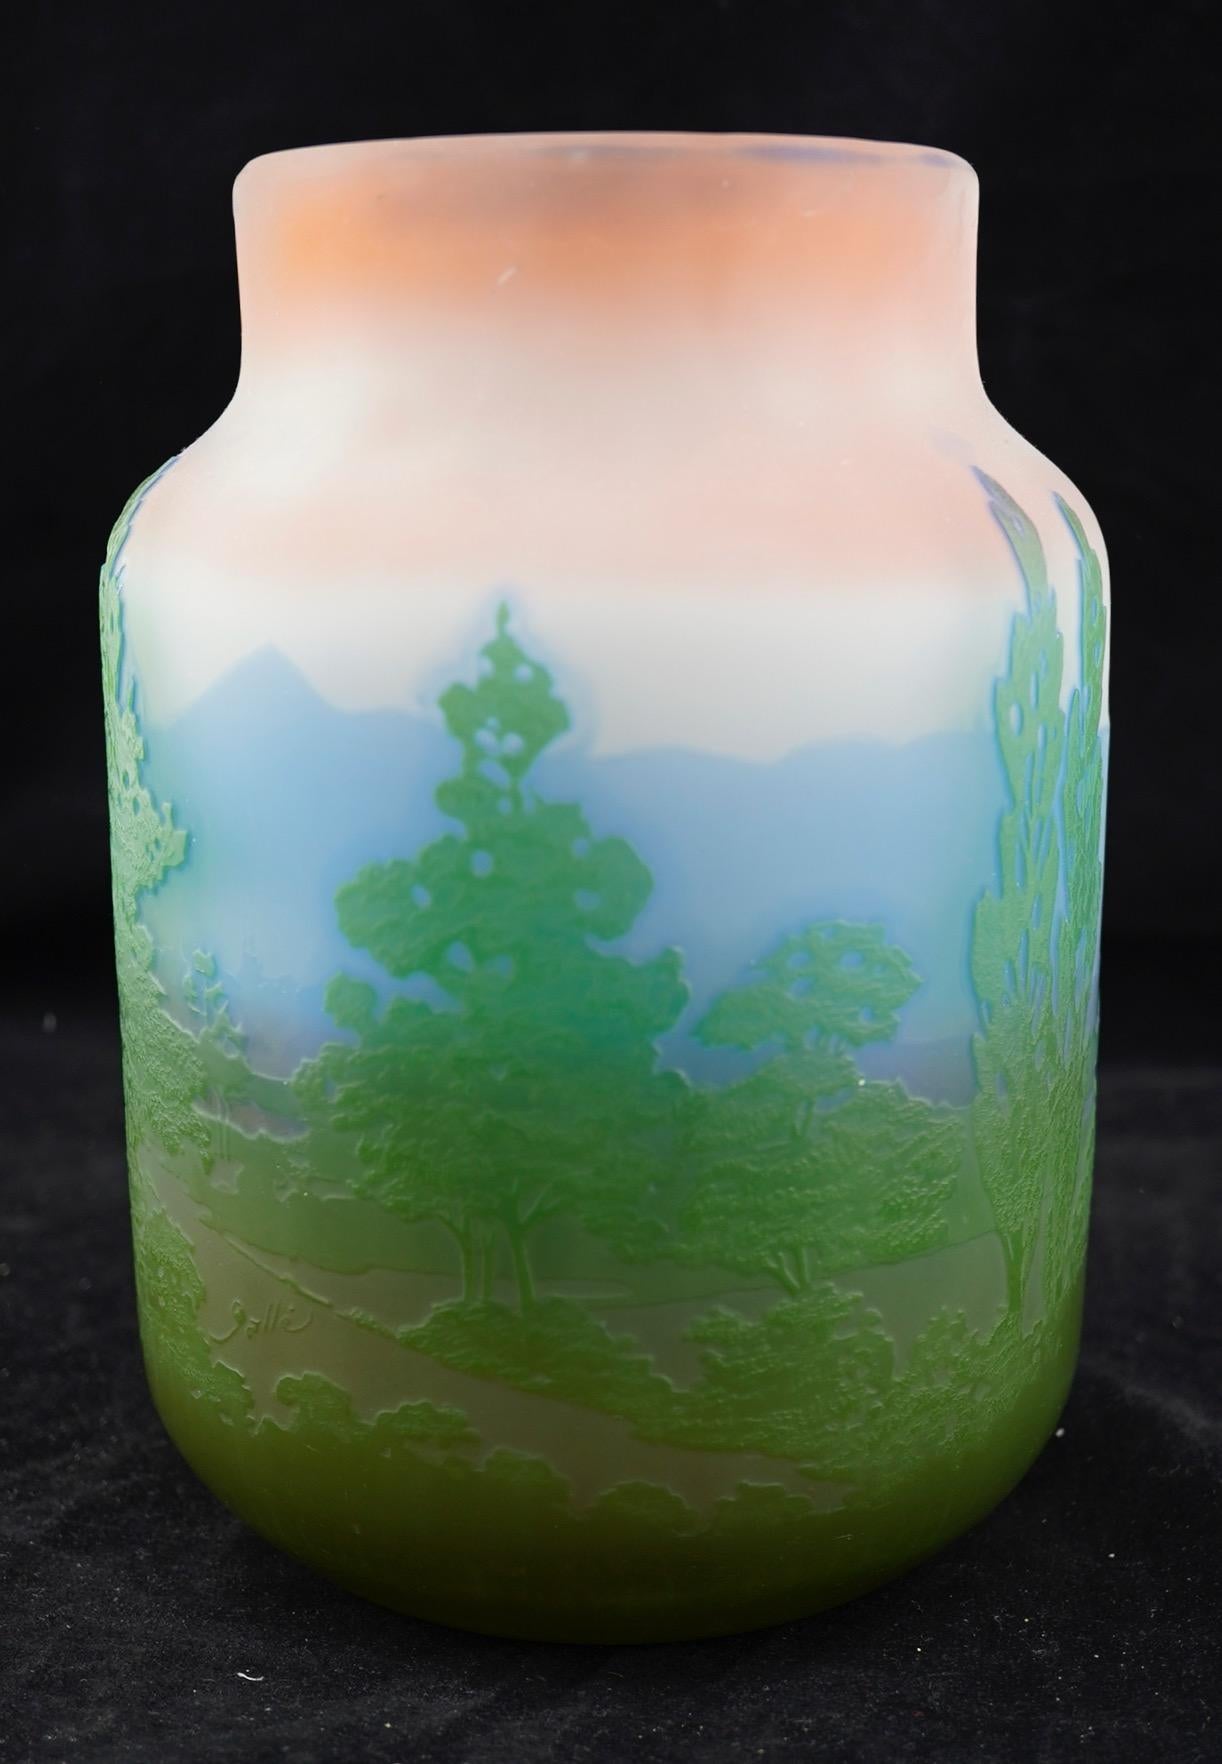 Galle cameo Alpine landscape vase in frosted pink glass, decorated with a green intercalaire tree scene over a blue mountain range. At least 3 glass layers. Signed in cameo with 